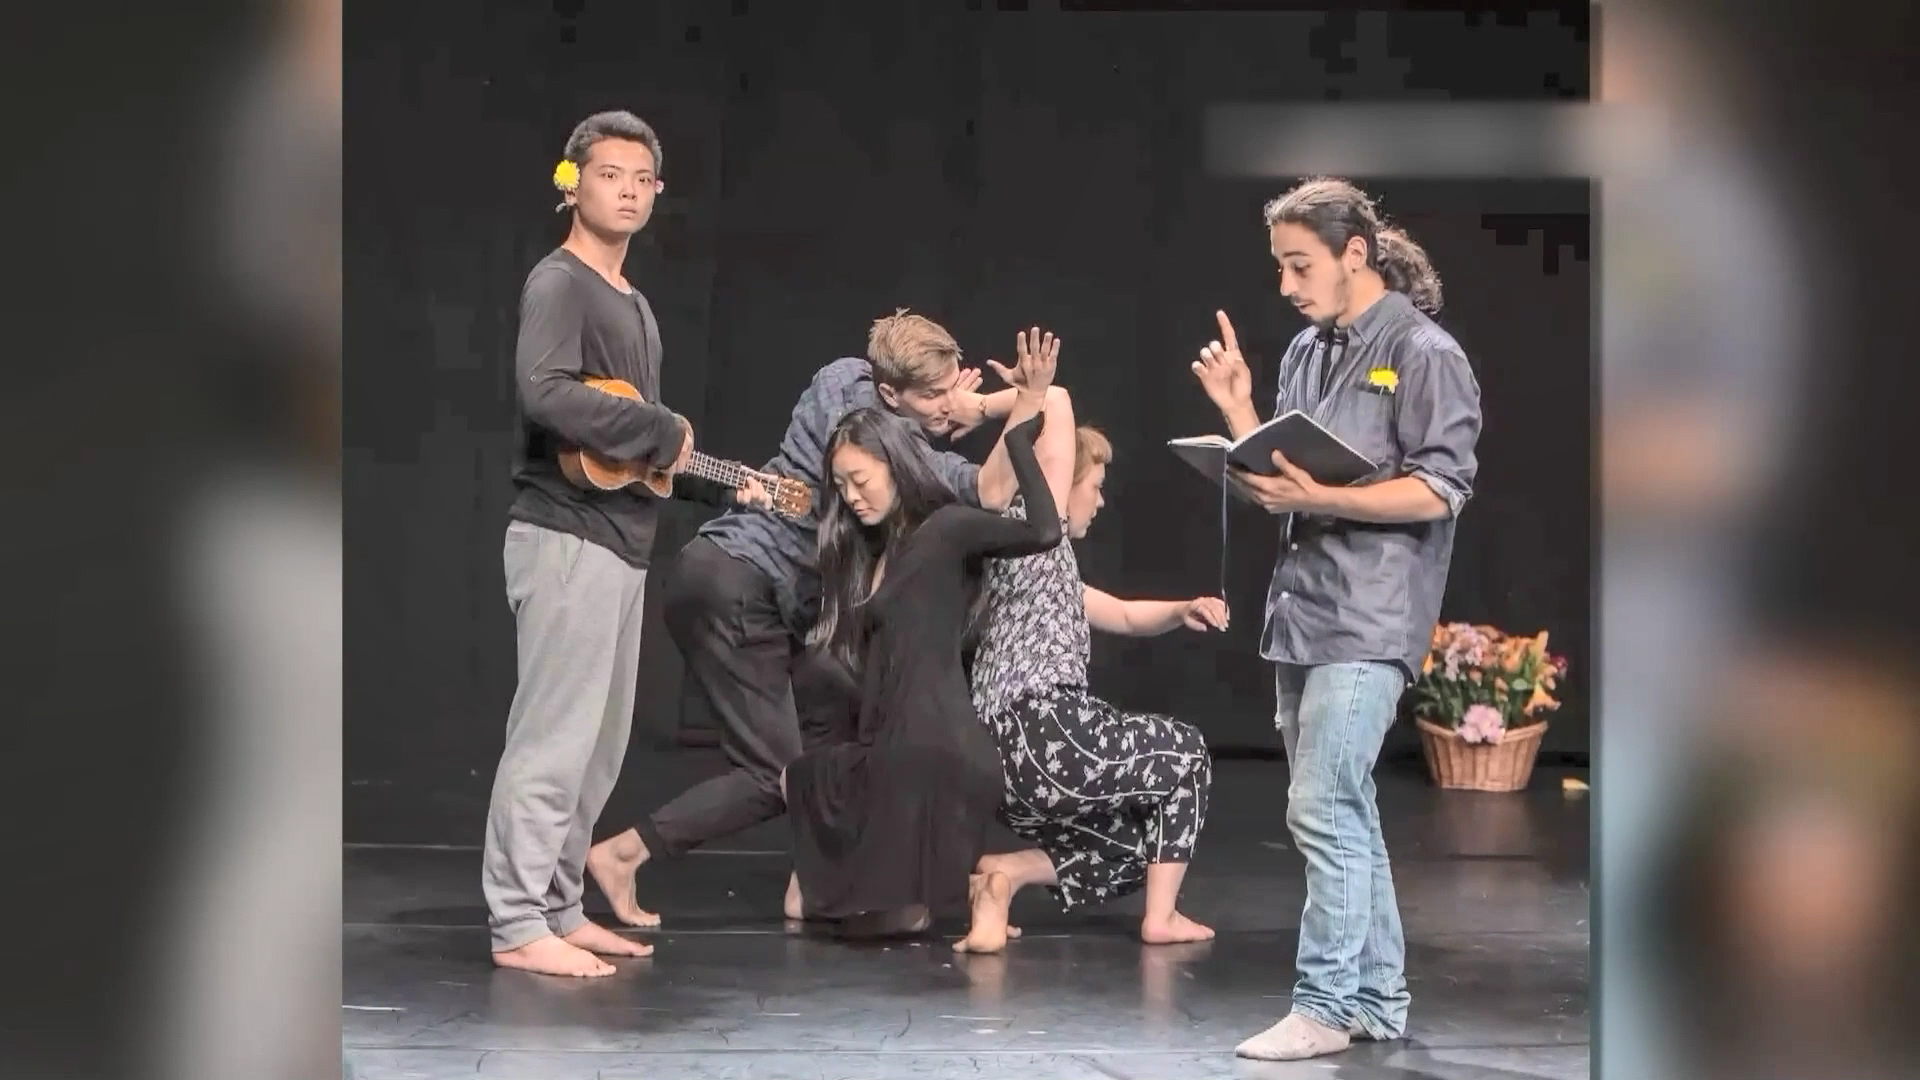 Ding Yiteng (L) rehearses with other actors at the Odin Teatret. /Courtesy: Ding Yiteng